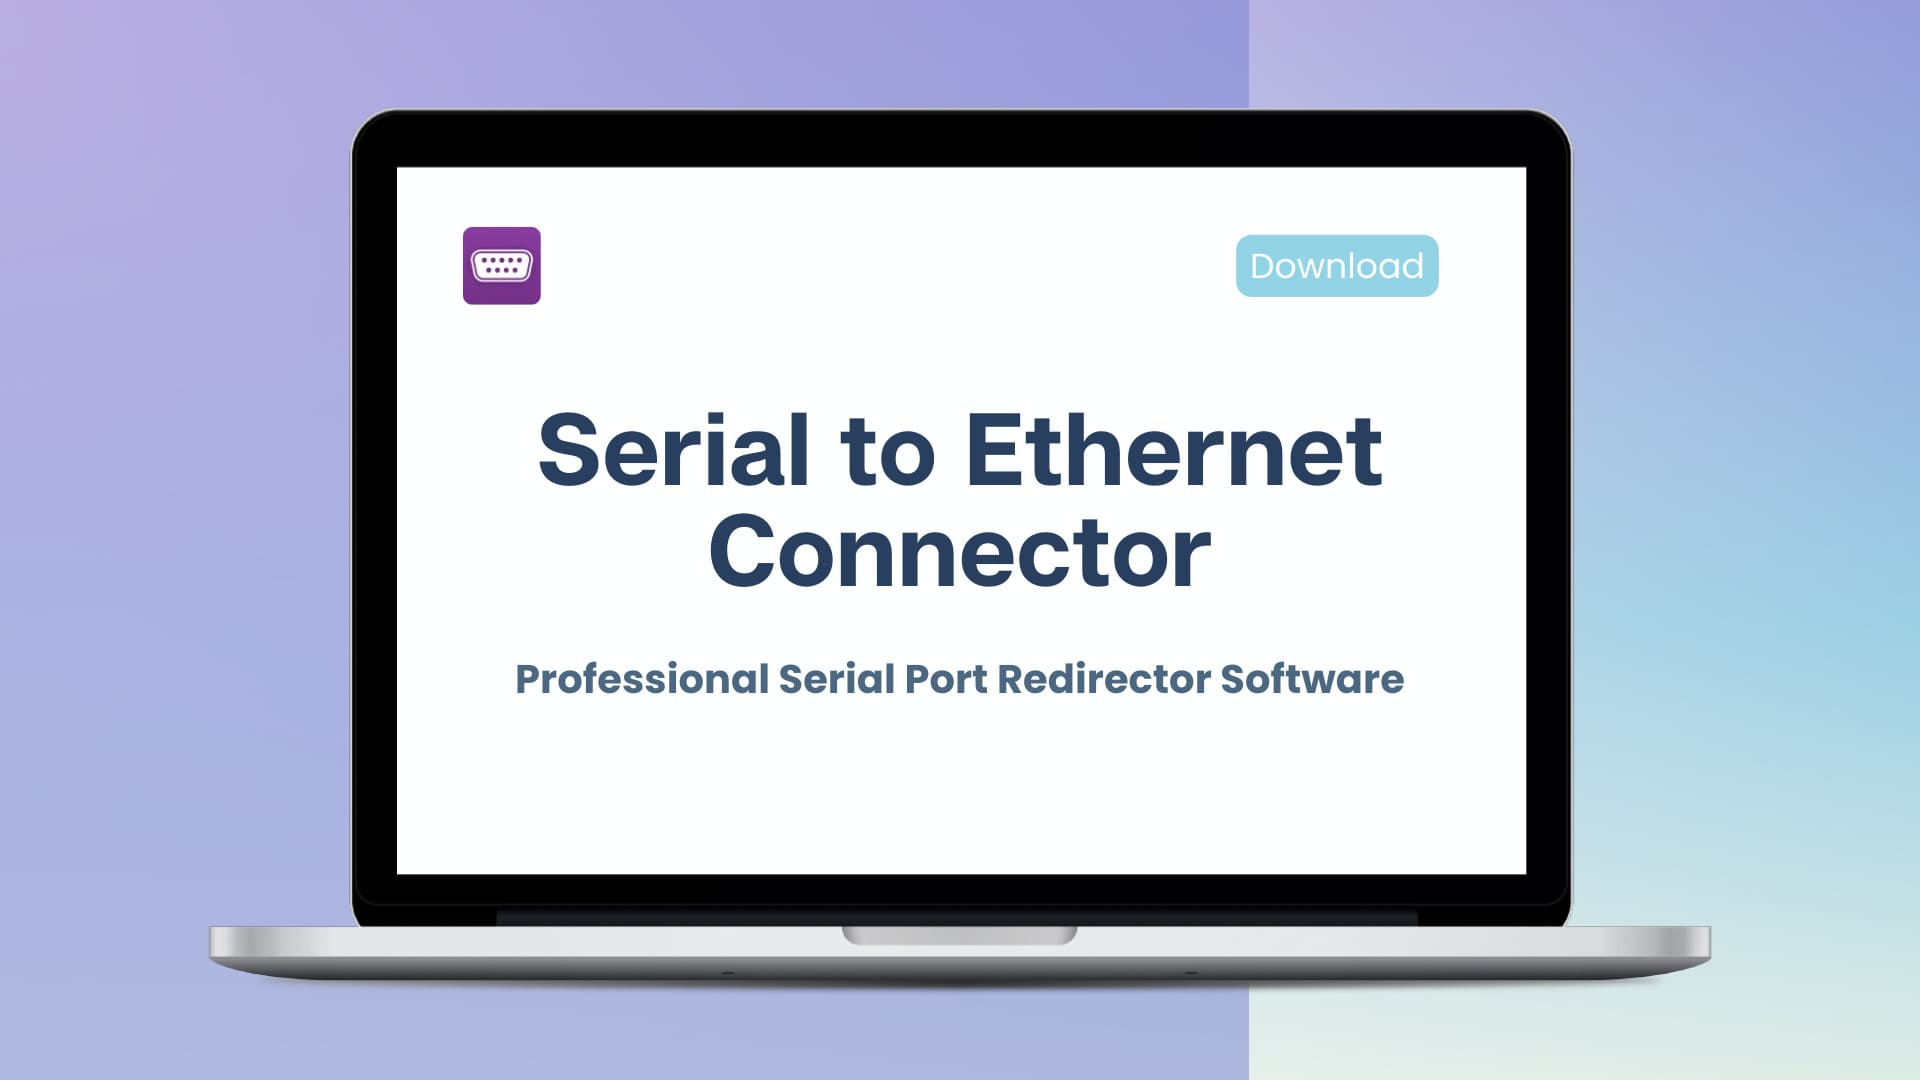 Serial to Ethernet Connector